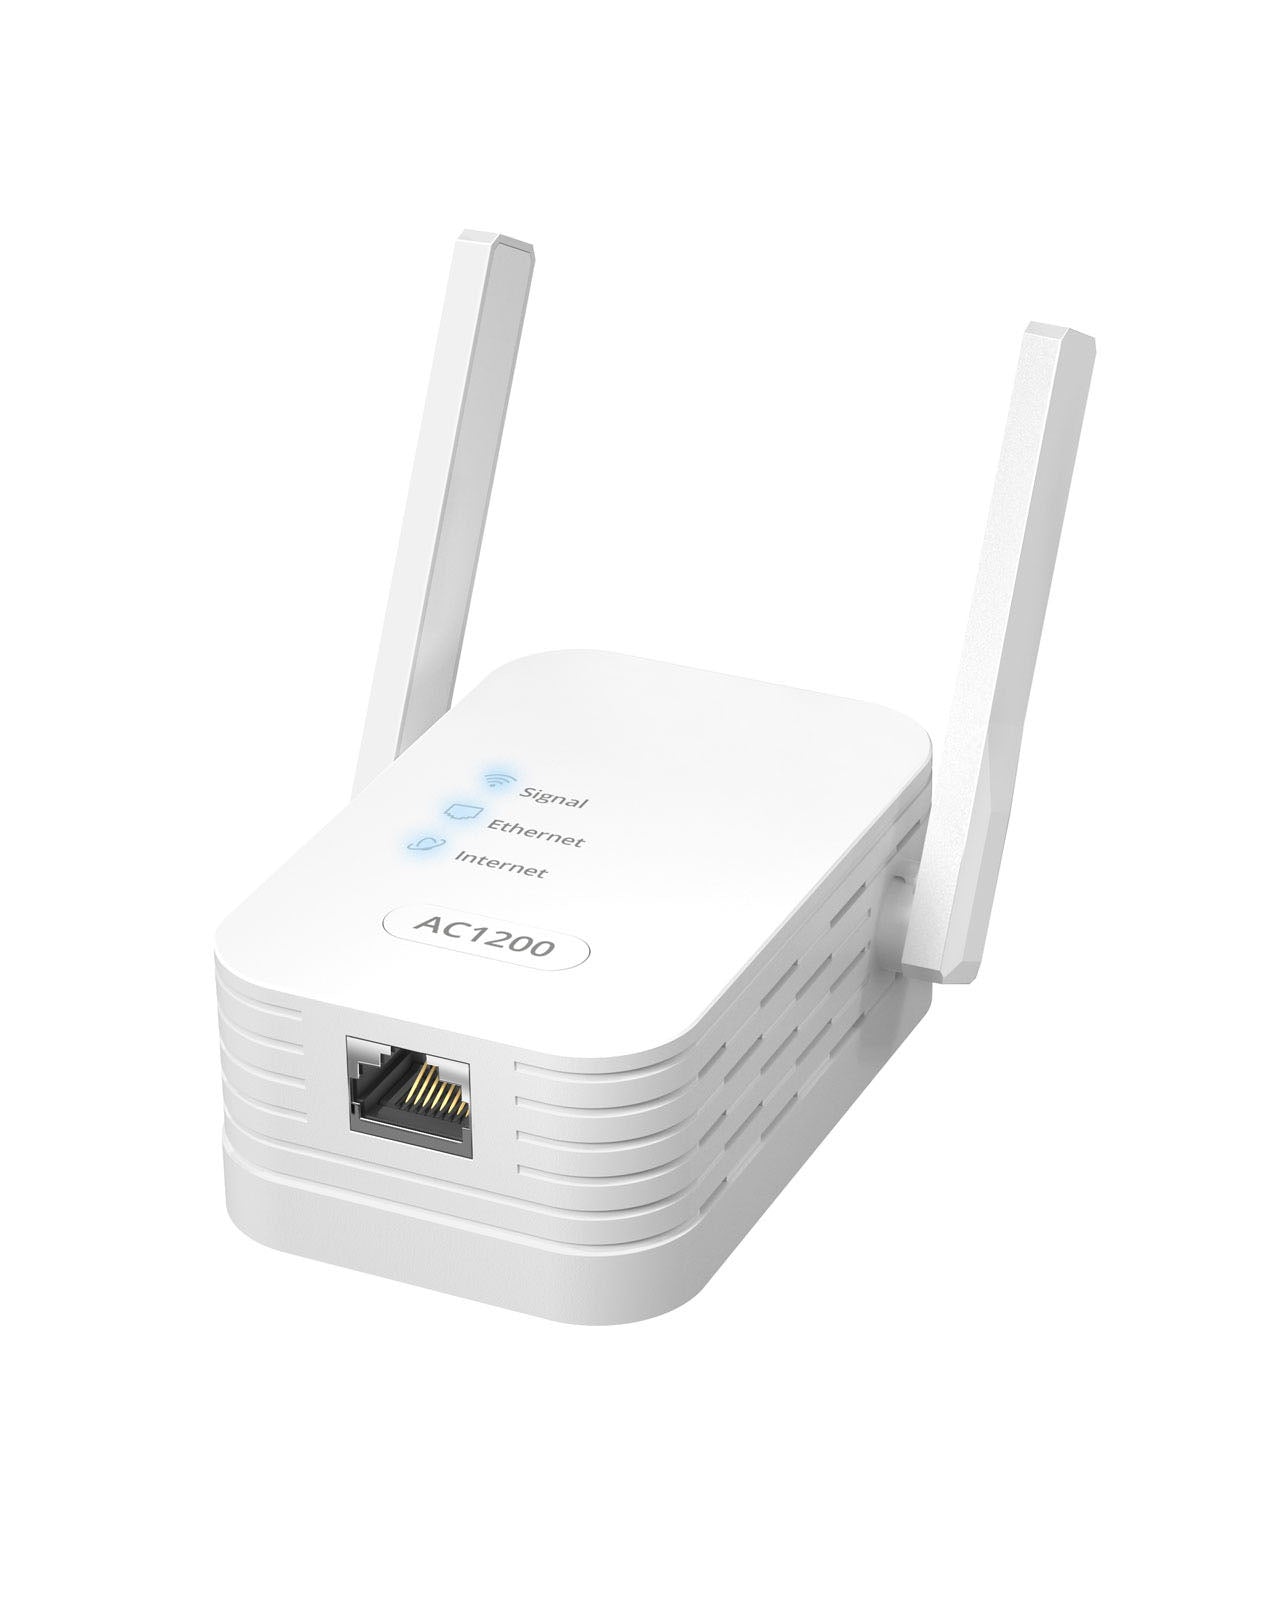 AC1200 WiFi to ethernet adapter